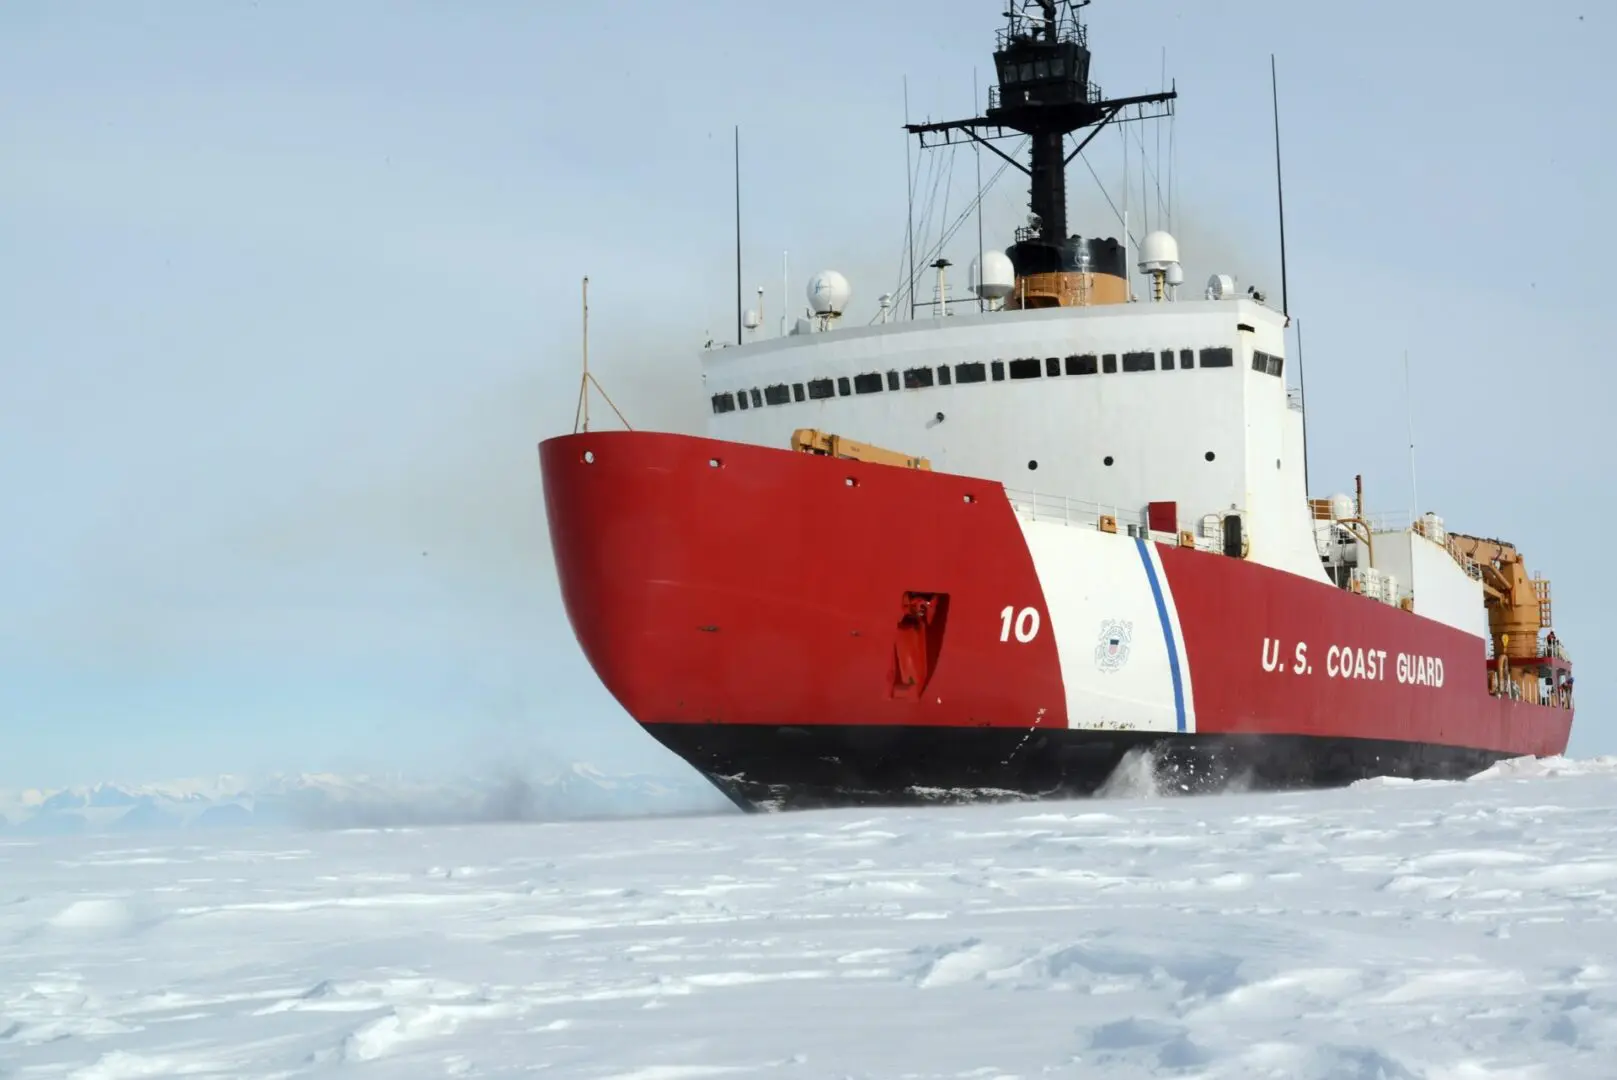 The Coast Guard Cutter Polar Star, with 75,000 horsepower and its 13,500-ton weight, is guided by its crew to break through Antarctic ice en route to the National Science Foundation's McMurdo Station, Jan. 15, 2017. The ship, which was designed more than 40 years ago, remains the world's most powerful non-nuclear icebreaker. (U.S. Coast Guard photo by Chief Petty Officer David Mosley)